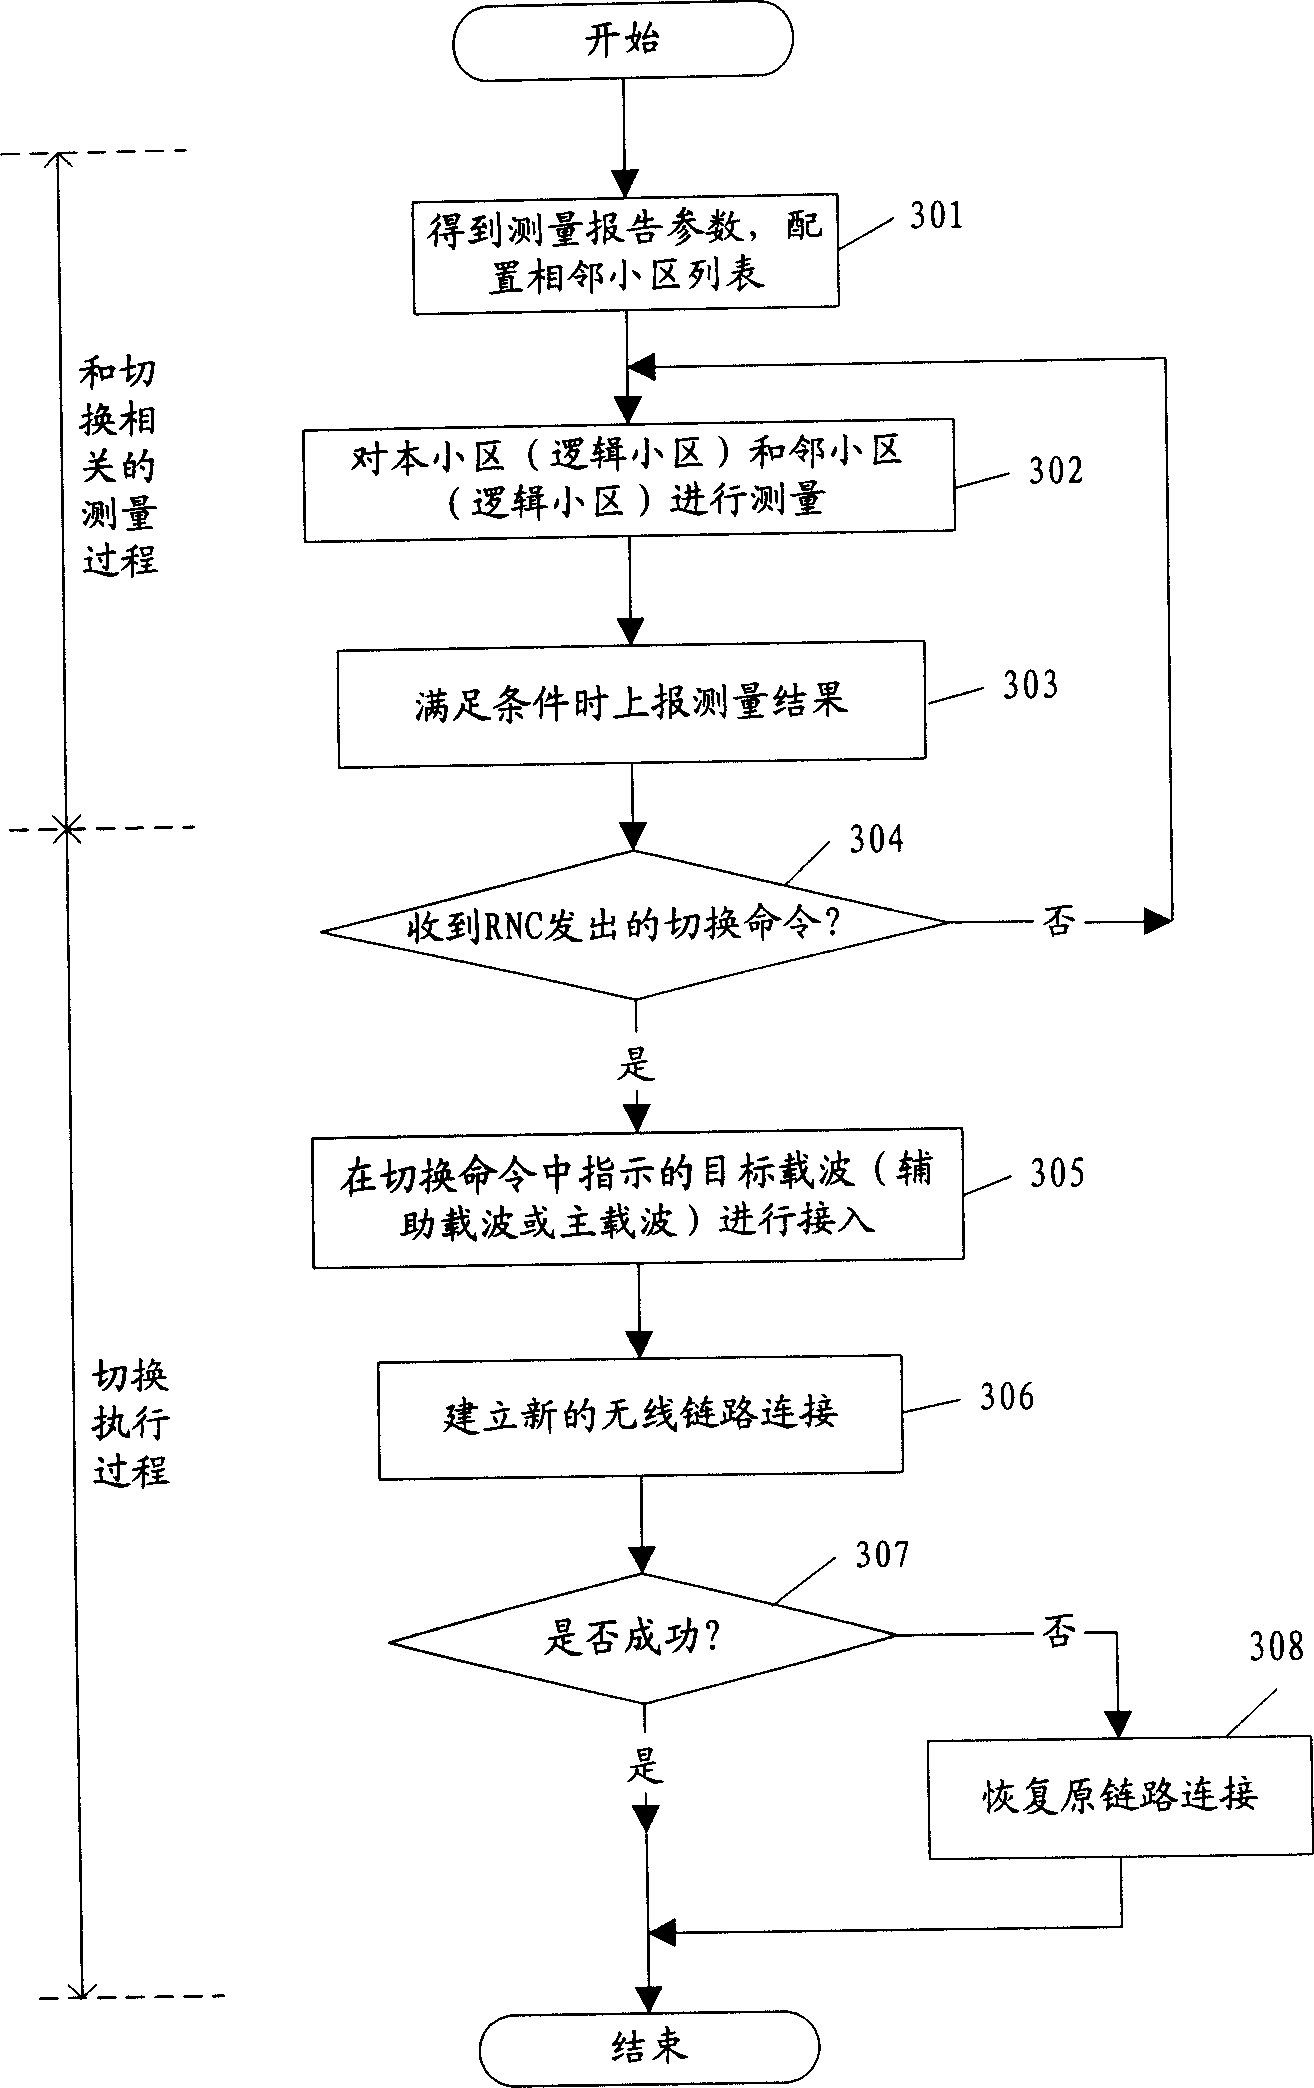 Switchover controll method of multiple frequency points system